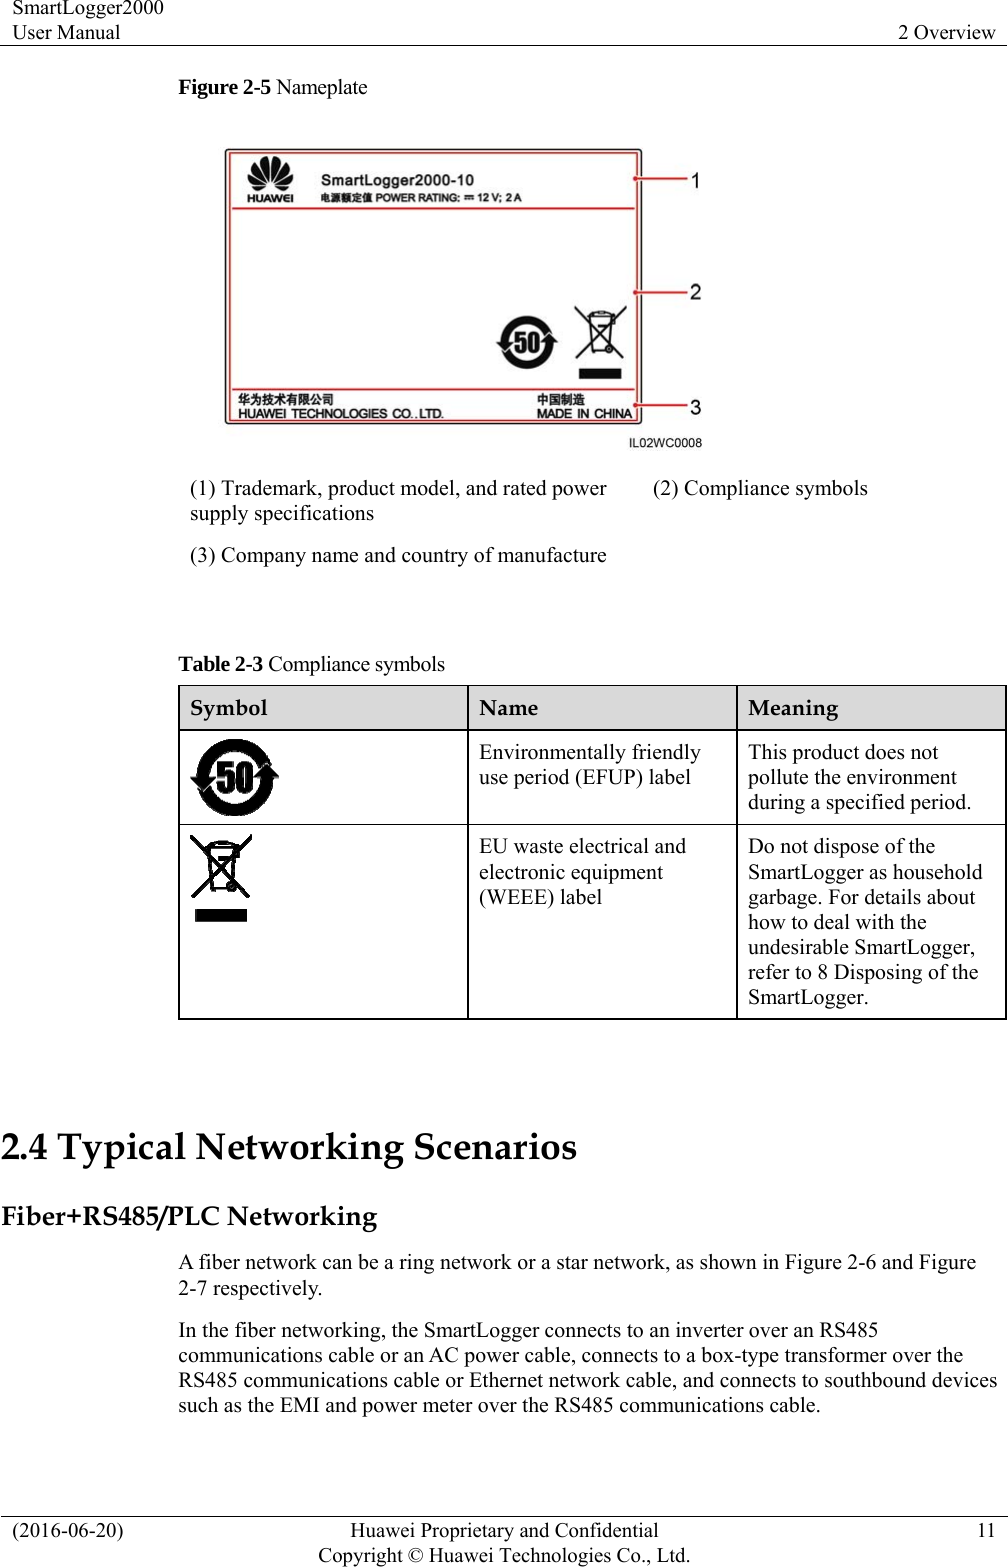 SmartLogger2000 User Manual  2 Overview (2016-06-20)  Huawei Proprietary and Confidential         Copyright © Huawei Technologies Co., Ltd.11 Figure 2-5 Nameplate  (1) Trademark, product model, and rated power supply specifications (2) Compliance symbols (3) Company name and country of manufacture  Table 2-3 Compliance symbols Symbol  Name  Meaning  Environmentally friendly use period (EFUP) label This product does not pollute the environment during a specified period.  EU waste electrical and electronic equipment (WEEE) label Do not dispose of the SmartLogger as household garbage. For details about how to deal with the undesirable SmartLogger, refer to 8 Disposing of the SmartLogger.   2.4 Typical Networking Scenarios Fiber+RS485/PLC Networking A fiber network can be a ring network or a star network, as shown in Figure 2-6 and Figure 2-7 respectively.   In the fiber networking, the SmartLogger connects to an inverter over an RS485 communications cable or an AC power cable, connects to a box-type transformer over the RS485 communications cable or Ethernet network cable, and connects to southbound devices such as the EMI and power meter over the RS485 communications cable.   